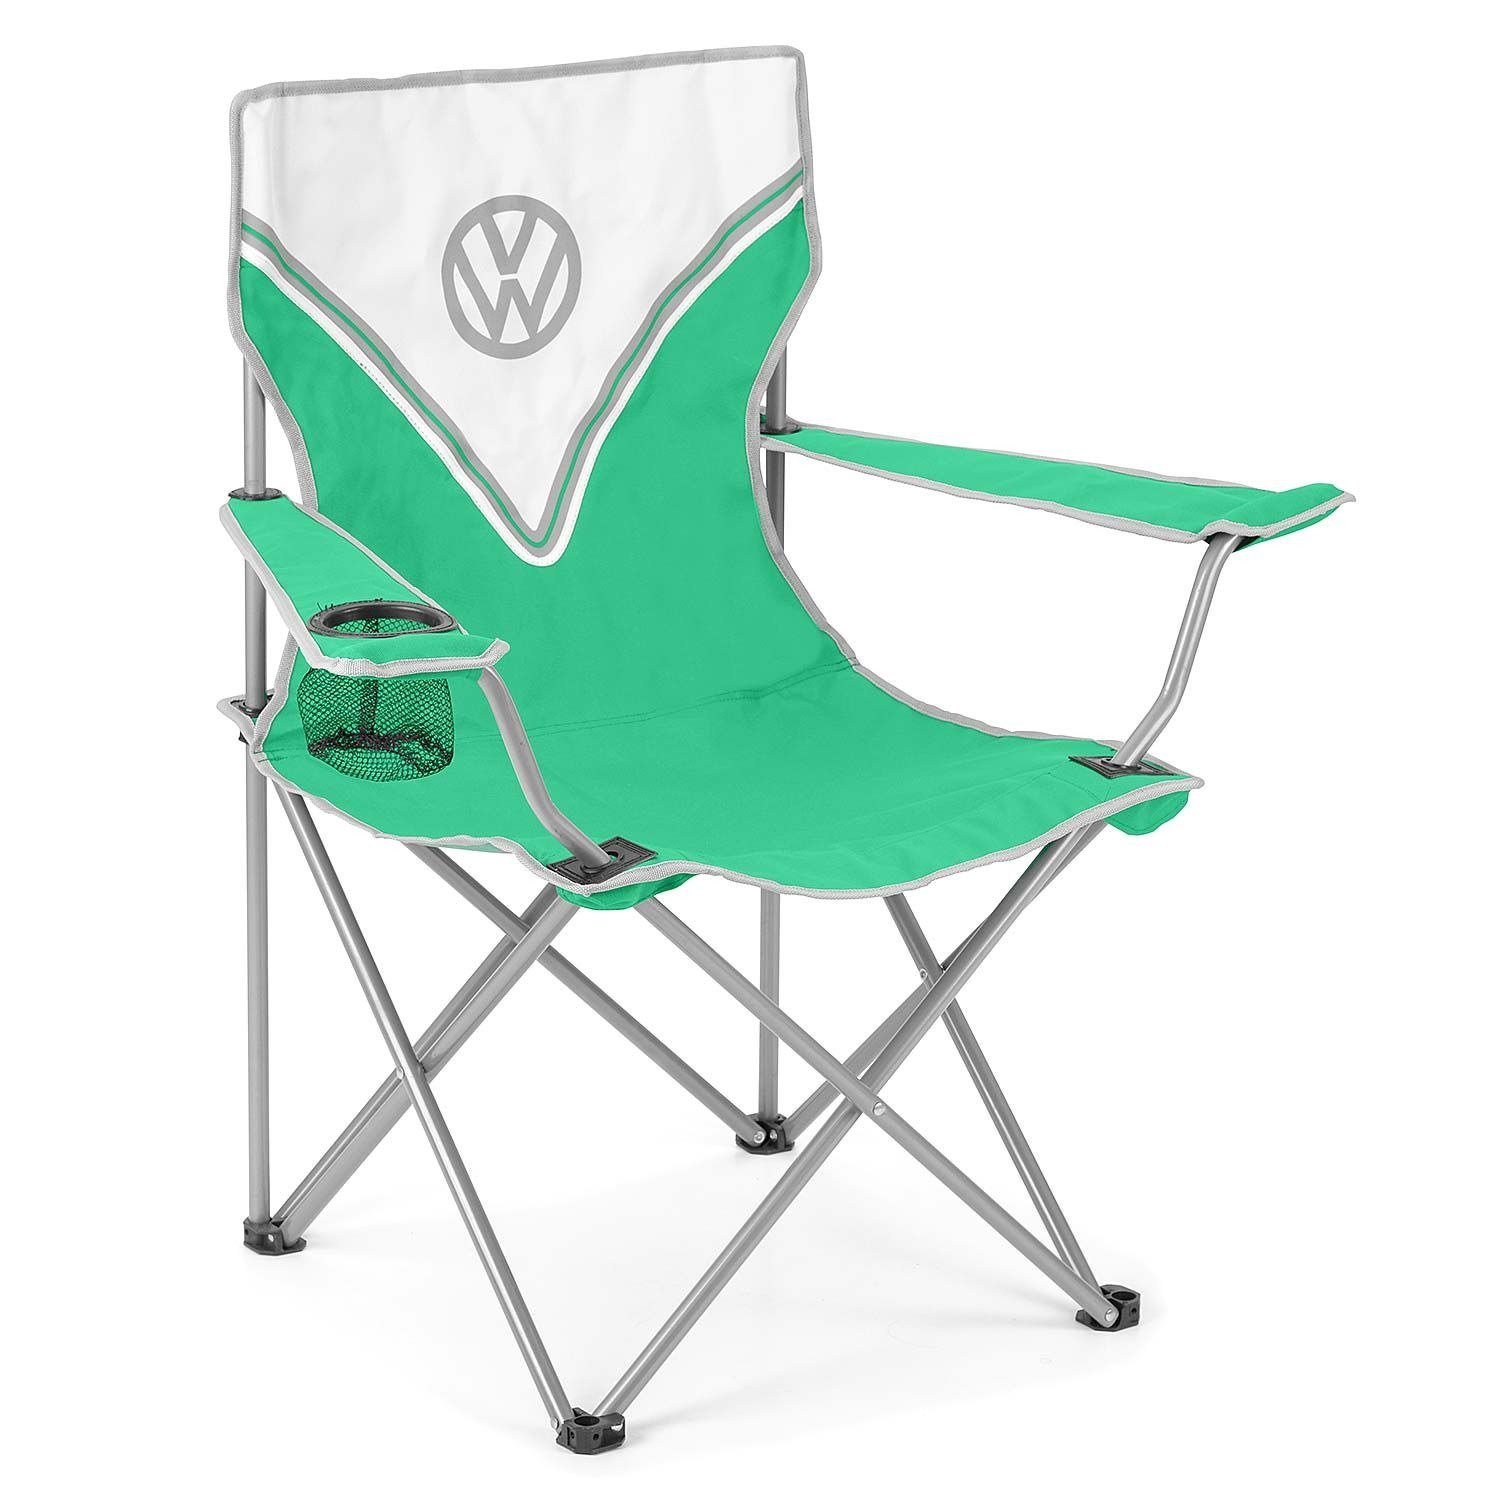 vw standard folding camping chair green - wow camping